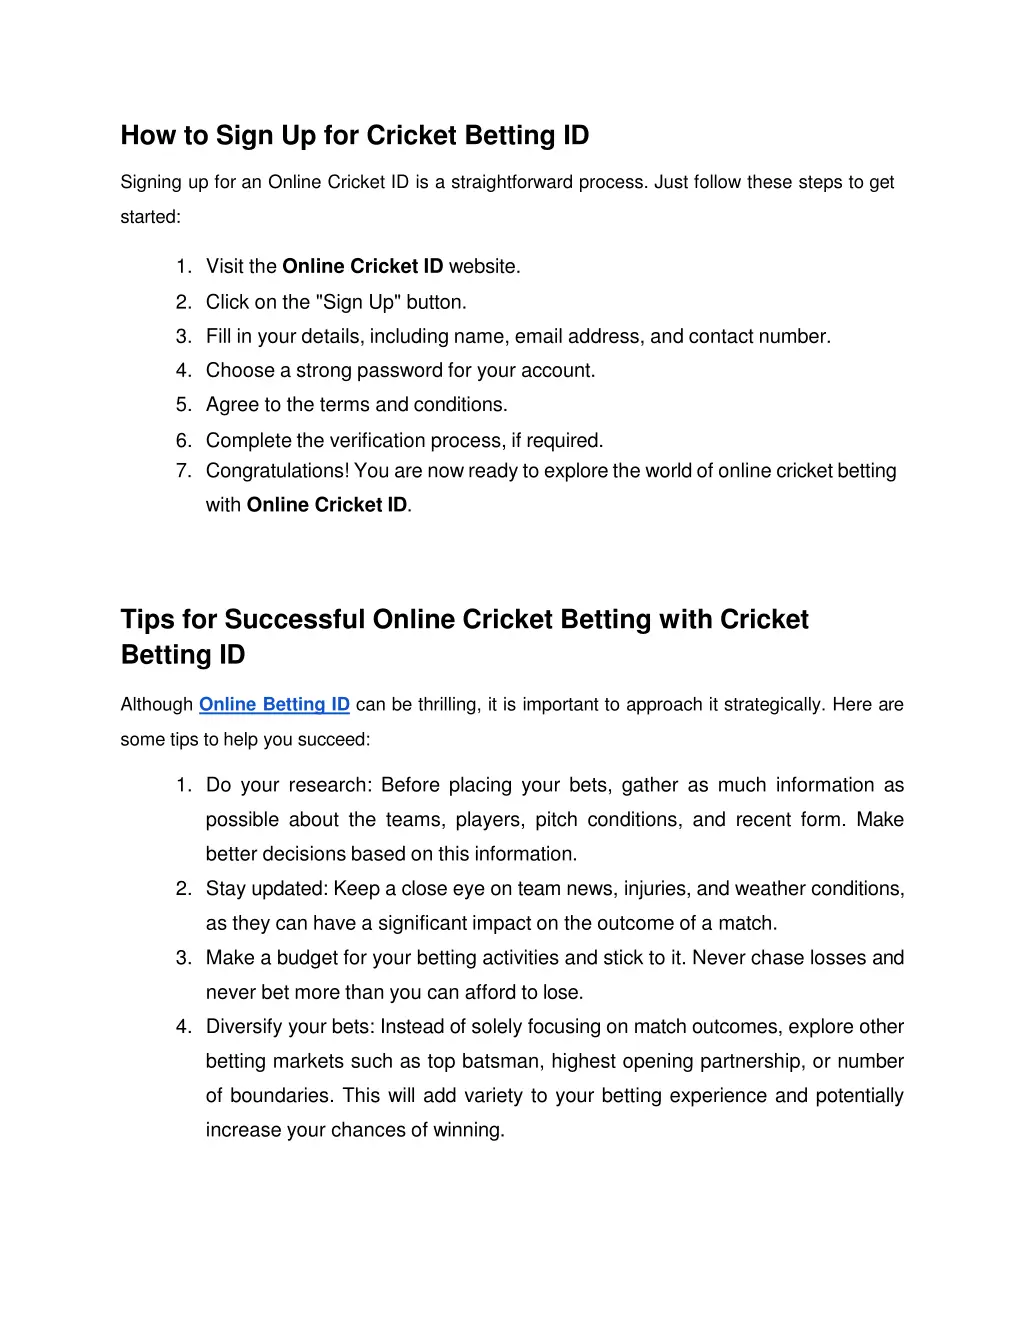 how to sign up for cricket betting id